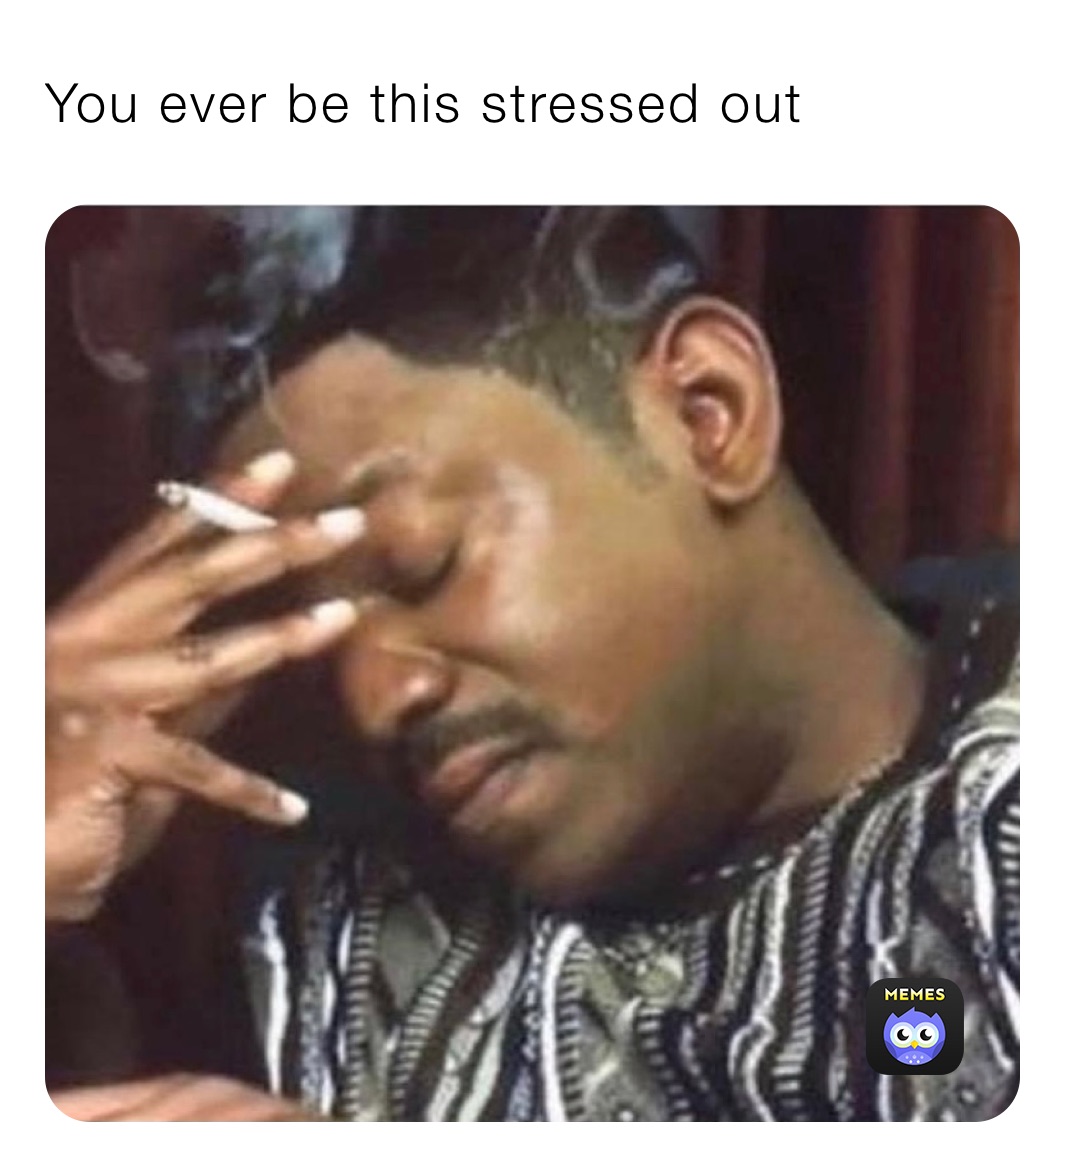 You ever be this stressed out